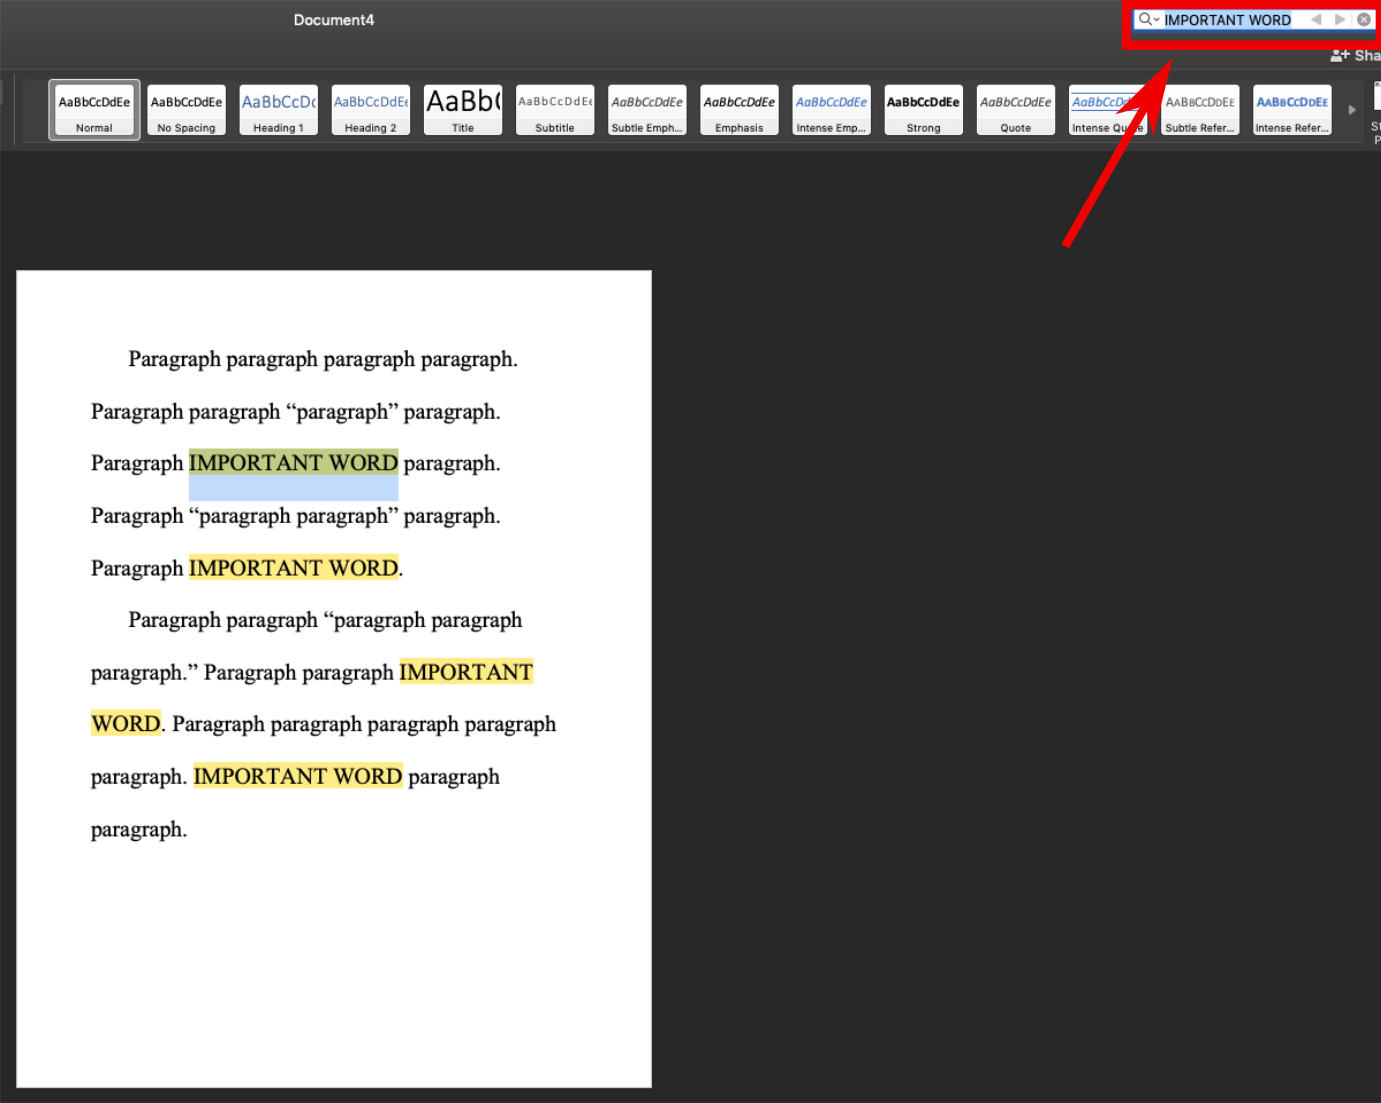 This image shows the same document displayed above. The search bar in the upper right corner is emphasized, with a red box around it and a red arrow pointing to it. "IMPORTANT WORD" has been typed into the search bar, and this phrase is highlighted in yellow every place it appears in the body of the text.